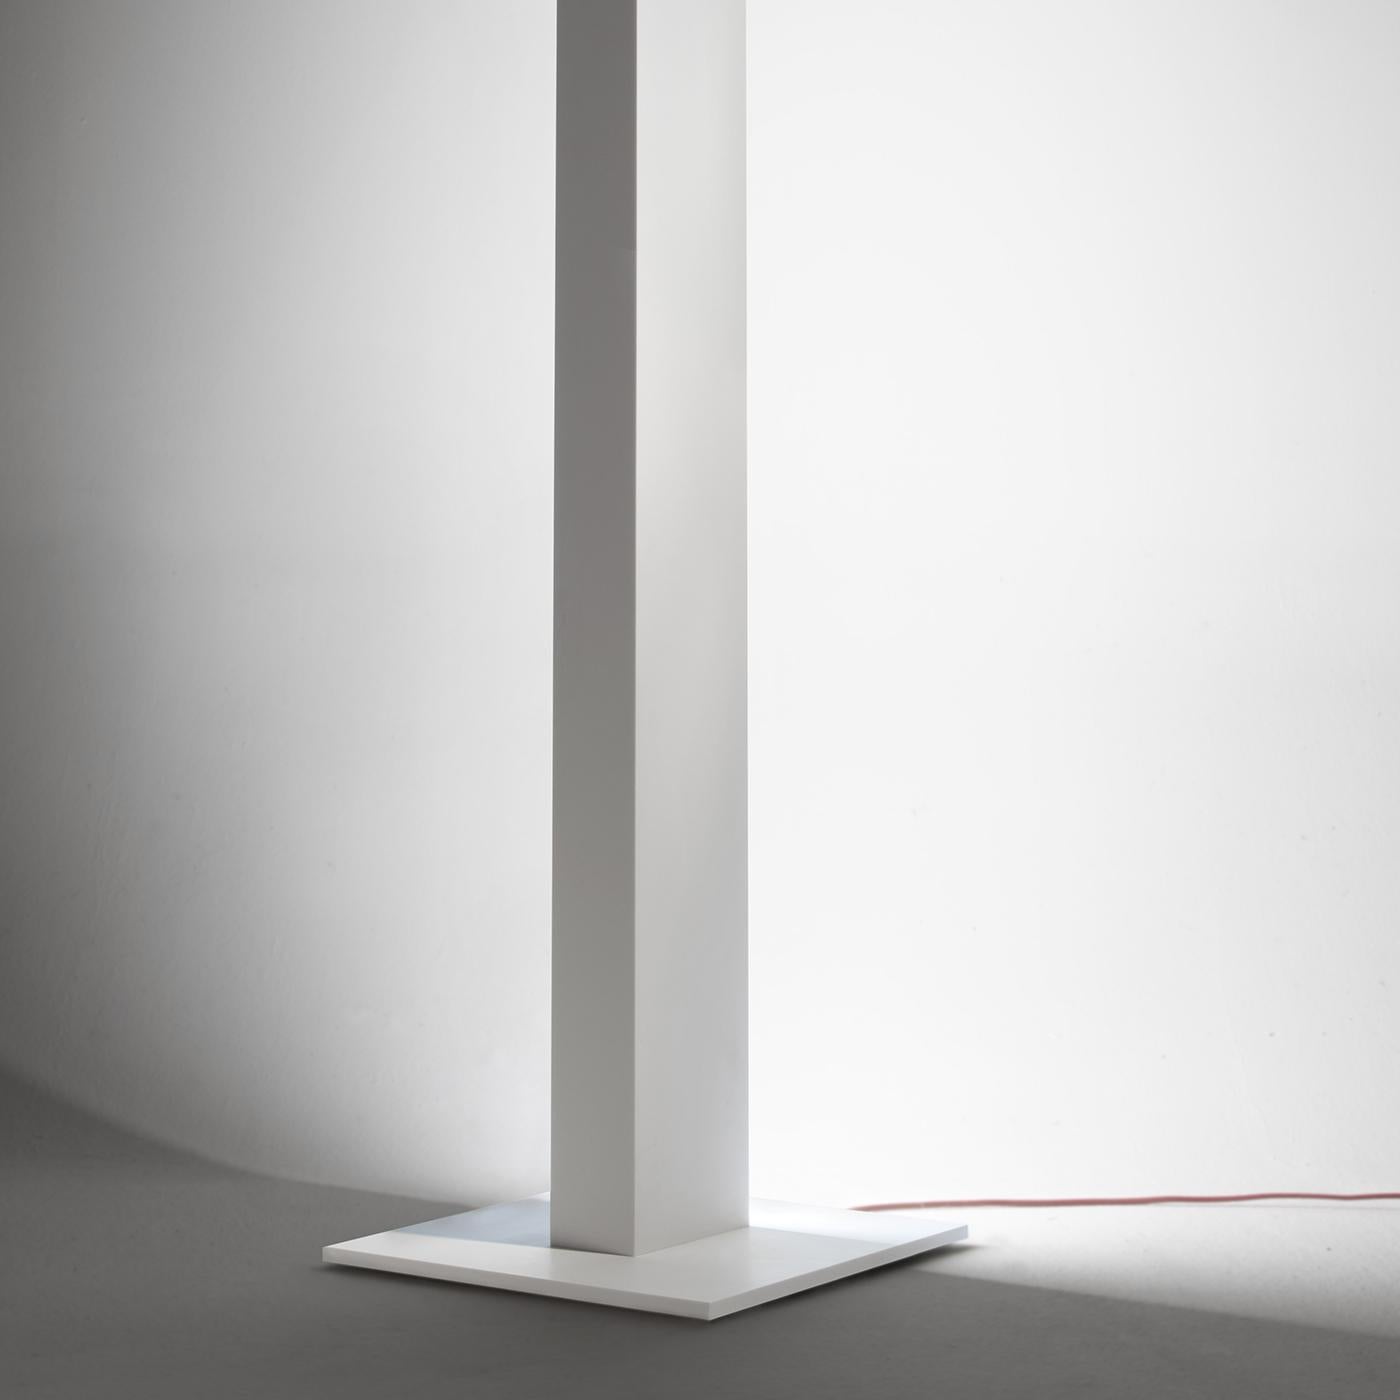 This iconic product by Luciano Pasut gives life to the essential functionality of a floor lamp, creating a sculptural masterpiece of sophistication and modernity. Handcrafted entirely in Corian, it offers an indirect light with the back functioning